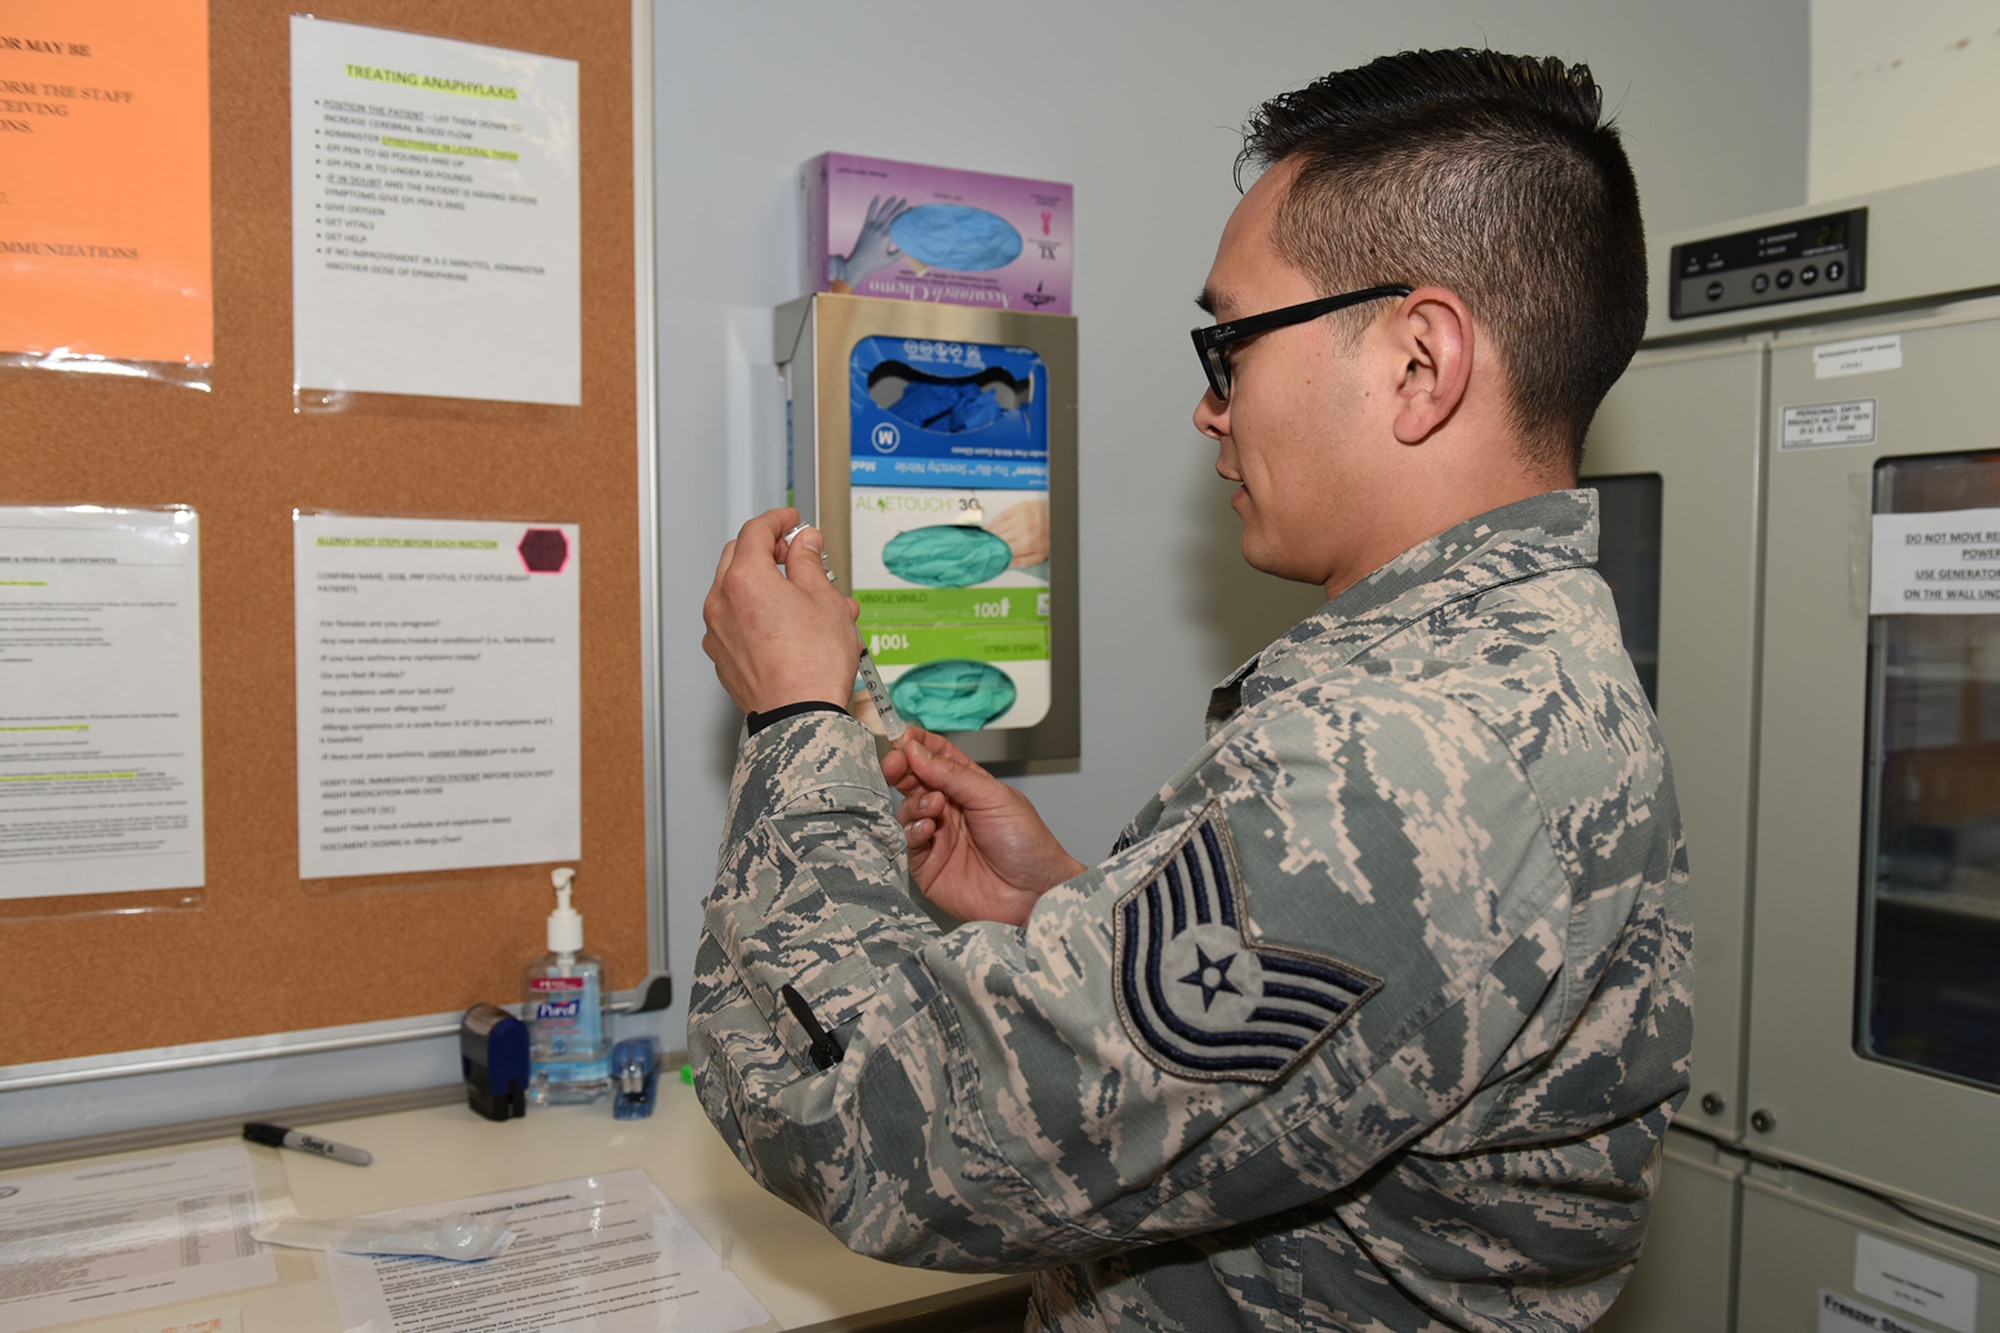 U.S Air Force Tech. Sgt. Ben Axman, 184th Medical Group aerospace medical technician, assigned to McConnell Air Force Base, Kan., practices medical procedures at RAF Alconbury, England, April 16, 2019. The 184th MDG worked closely with medical units at RAF Alconbury, RAF Croughton and RAF Lakenheath to improve total force medical capabilities. (U.S. Air Force photo by Airman 1st Class Jennifer Zima)